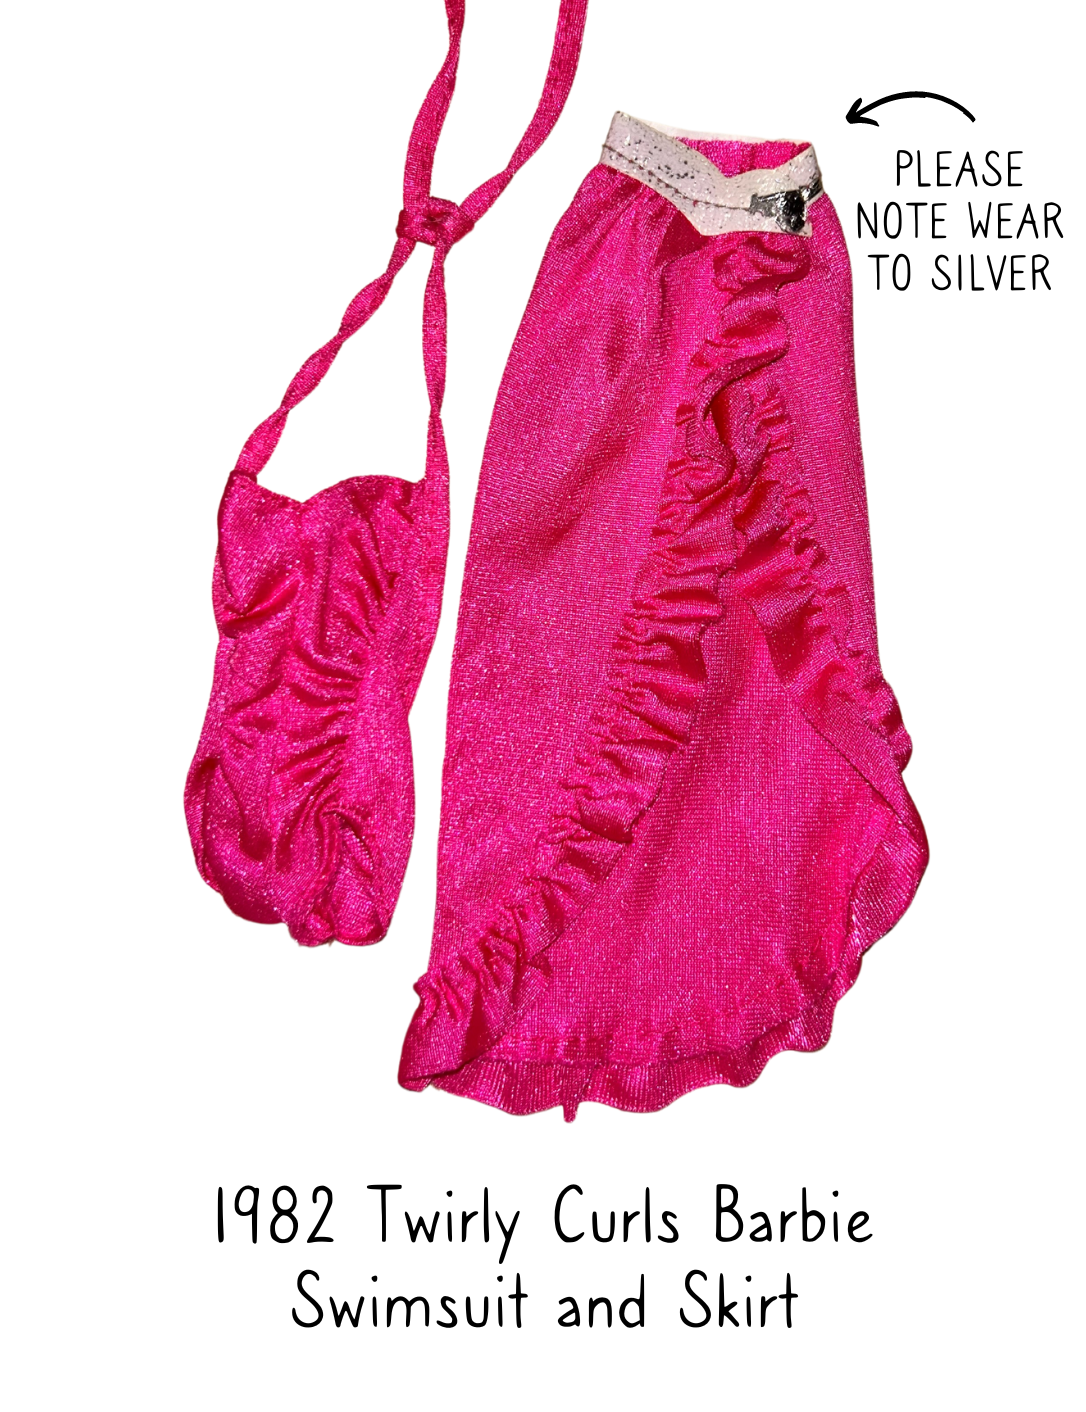 1982 Twirly Curls Barbie Fashion Doll Pink Skirt Outfit